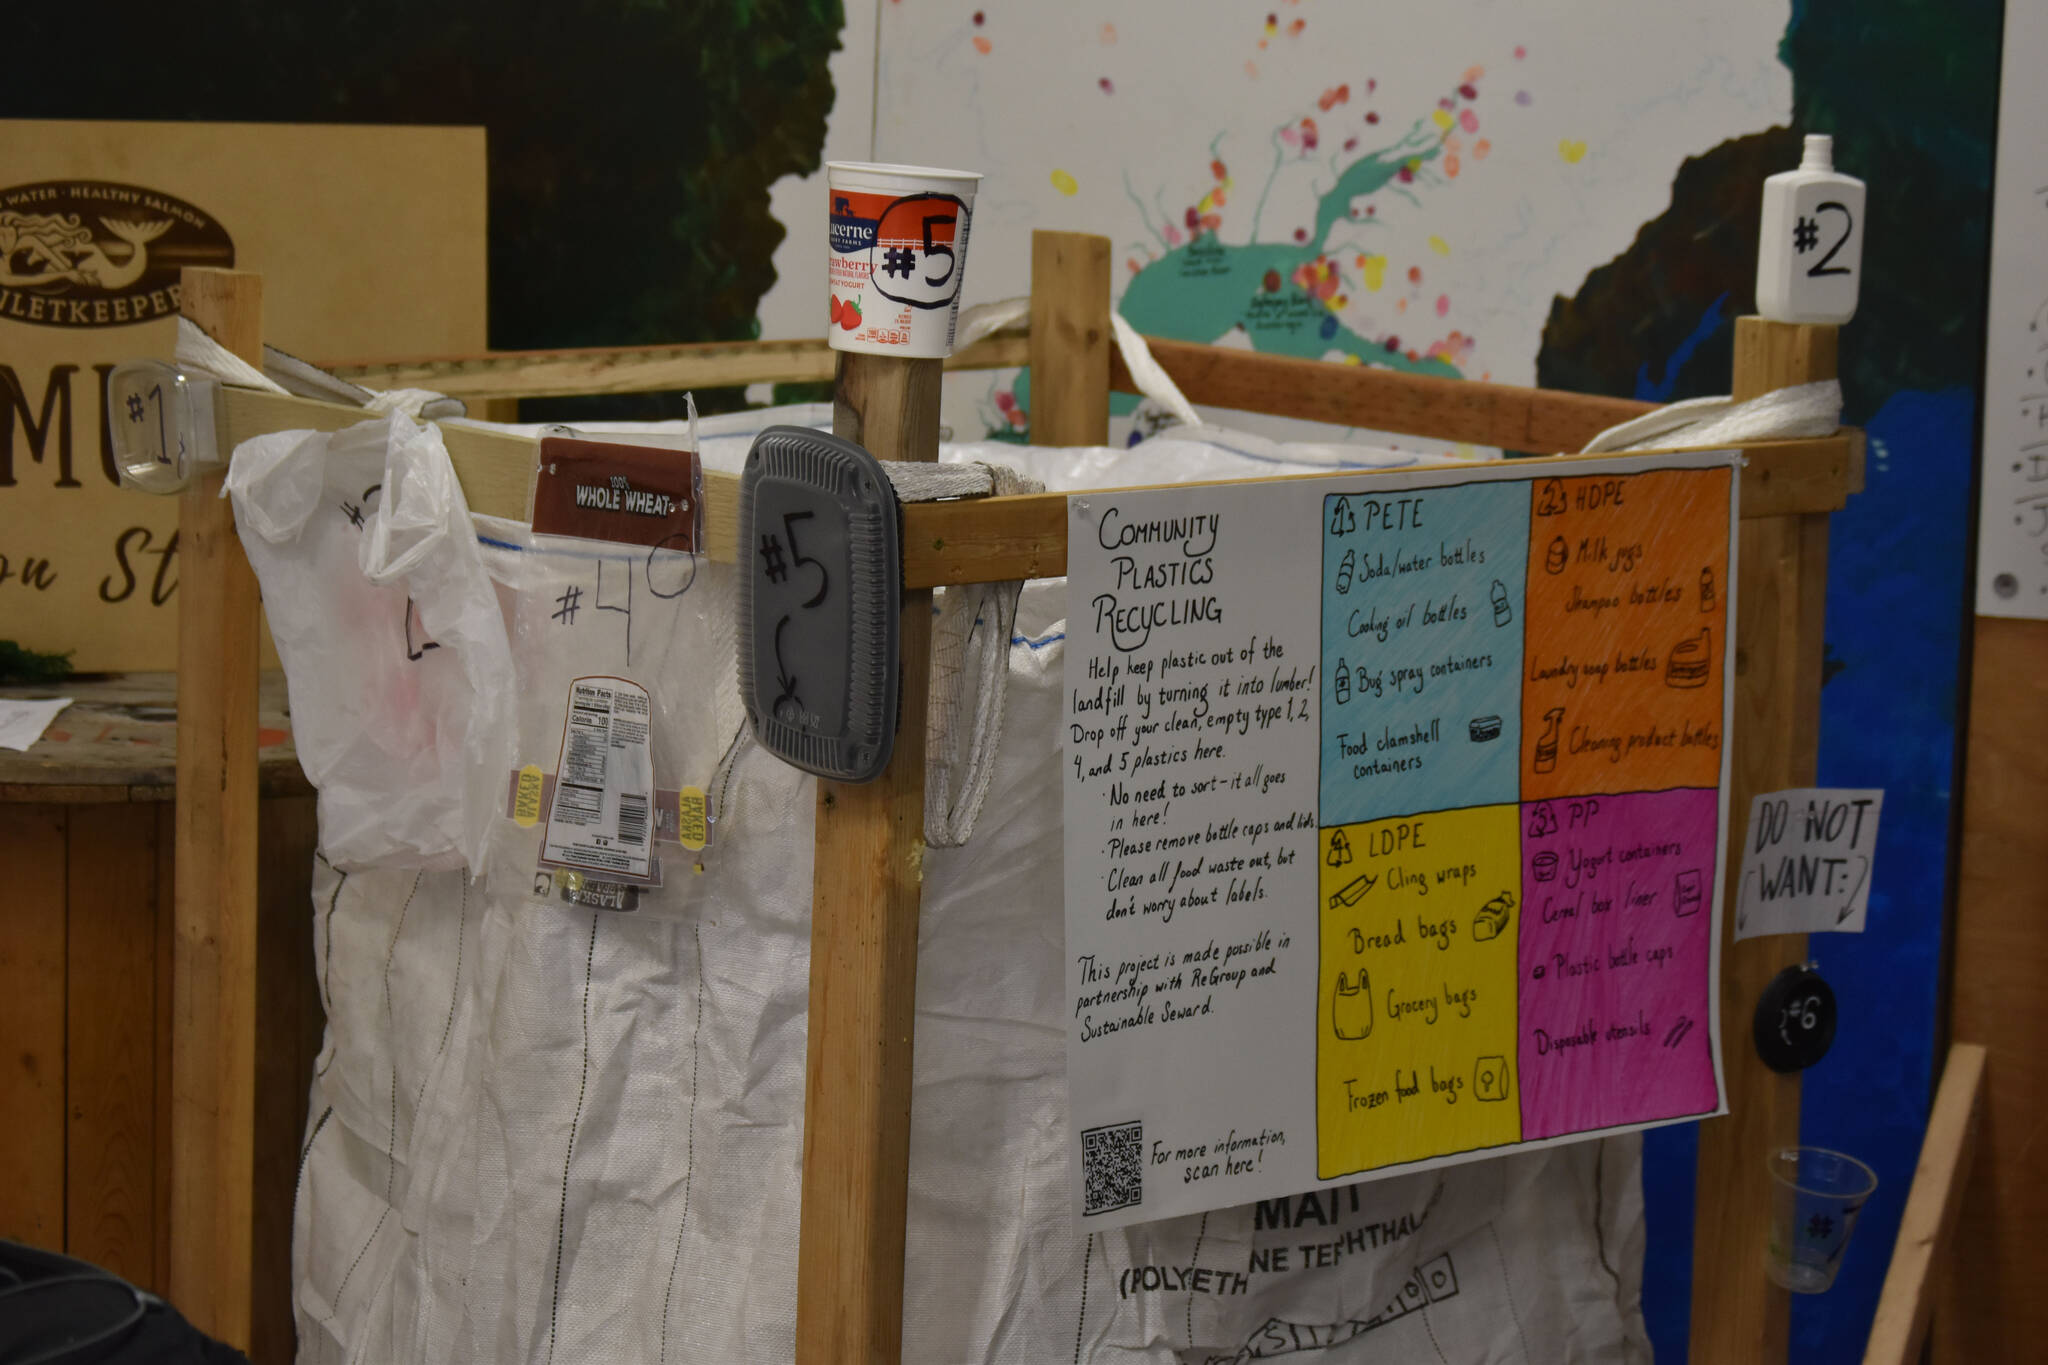 Signs and examples on the recycling super sack at the Cook Inletkeeper Community Action Studio show which plastics are desired as part of the project in Soldotna, Alaska, on Aug. 11, 2022. Plastics from types 1, 2, 4 and 5 can be deposited.(Jake Dye/Peninsula Clarion)